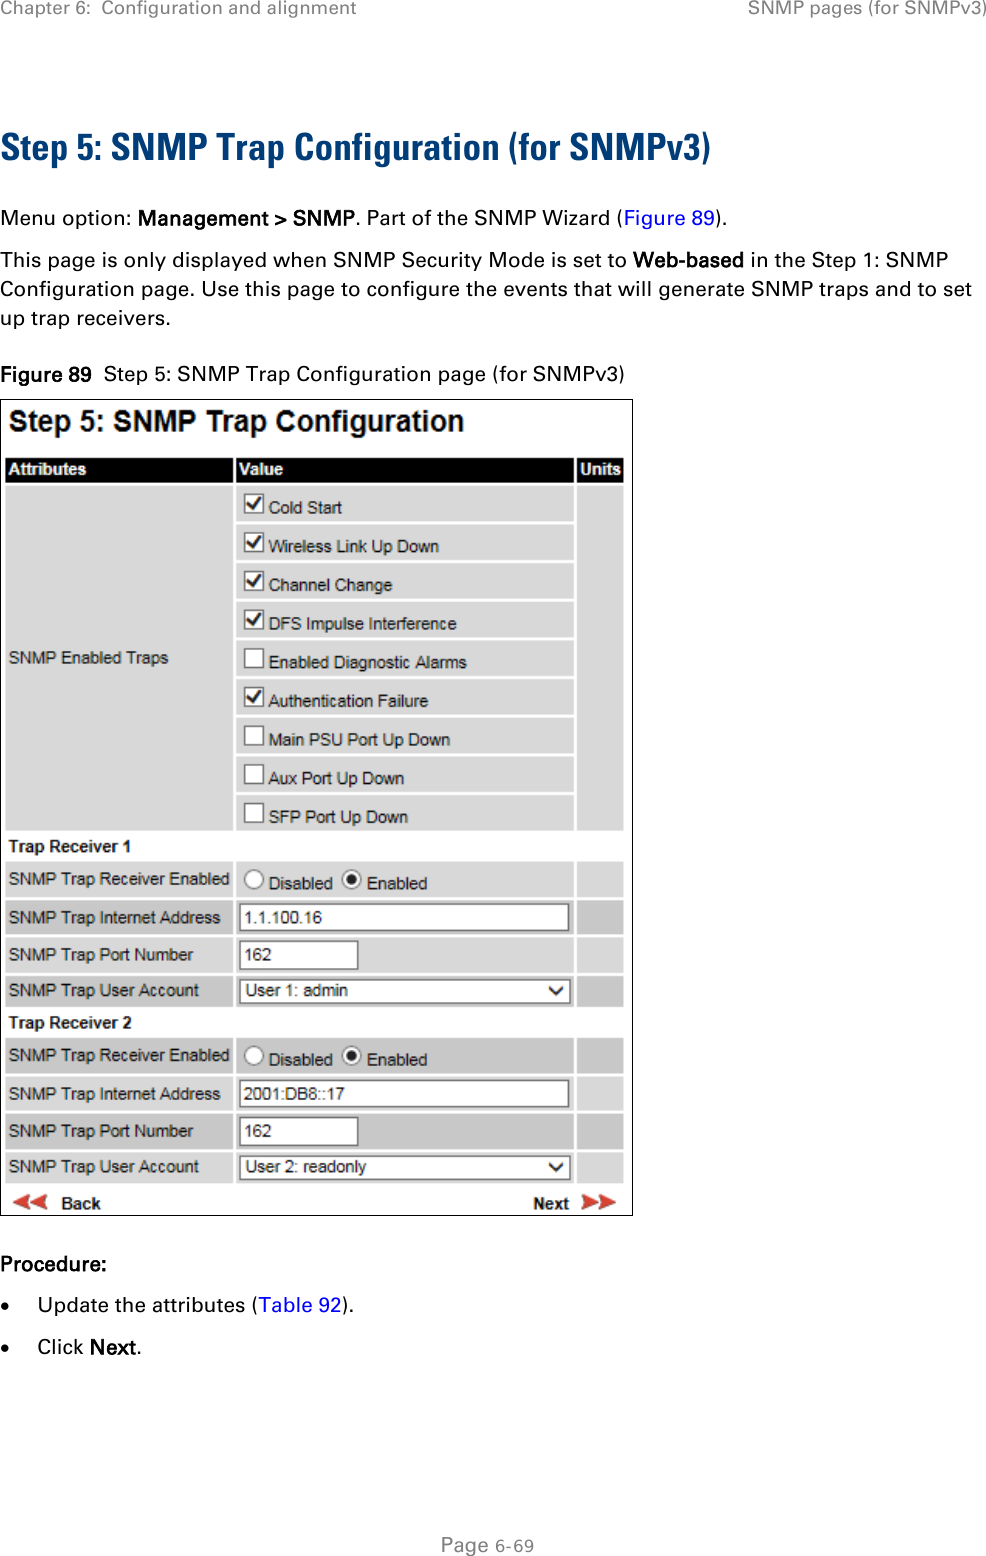 Chapter 6:  Configuration and alignment SNMP pages (for SNMPv3)  Step 5: SNMP Trap Configuration (for SNMPv3) Menu option: Management &gt; SNMP. Part of the SNMP Wizard (Figure 89). This page is only displayed when SNMP Security Mode is set to Web-based in the Step 1: SNMP Configuration page. Use this page to configure the events that will generate SNMP traps and to set up trap receivers. Figure 89  Step 5: SNMP Trap Configuration page (for SNMPv3)  Procedure: • Update the attributes (Table 92). • Click Next.  Page 6-69 